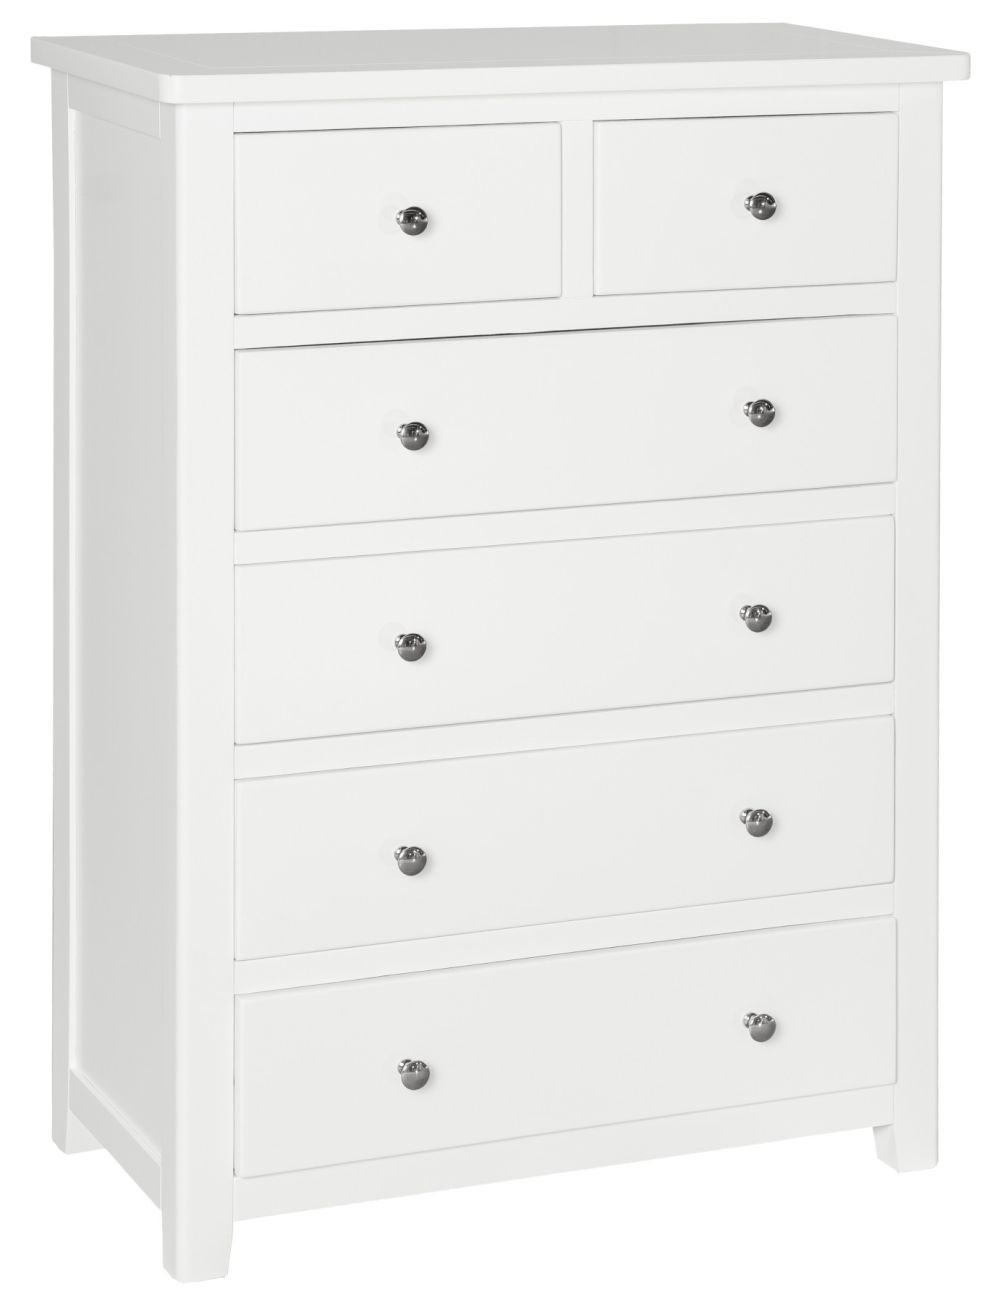 Henley White Painted 24 Drawer Chest